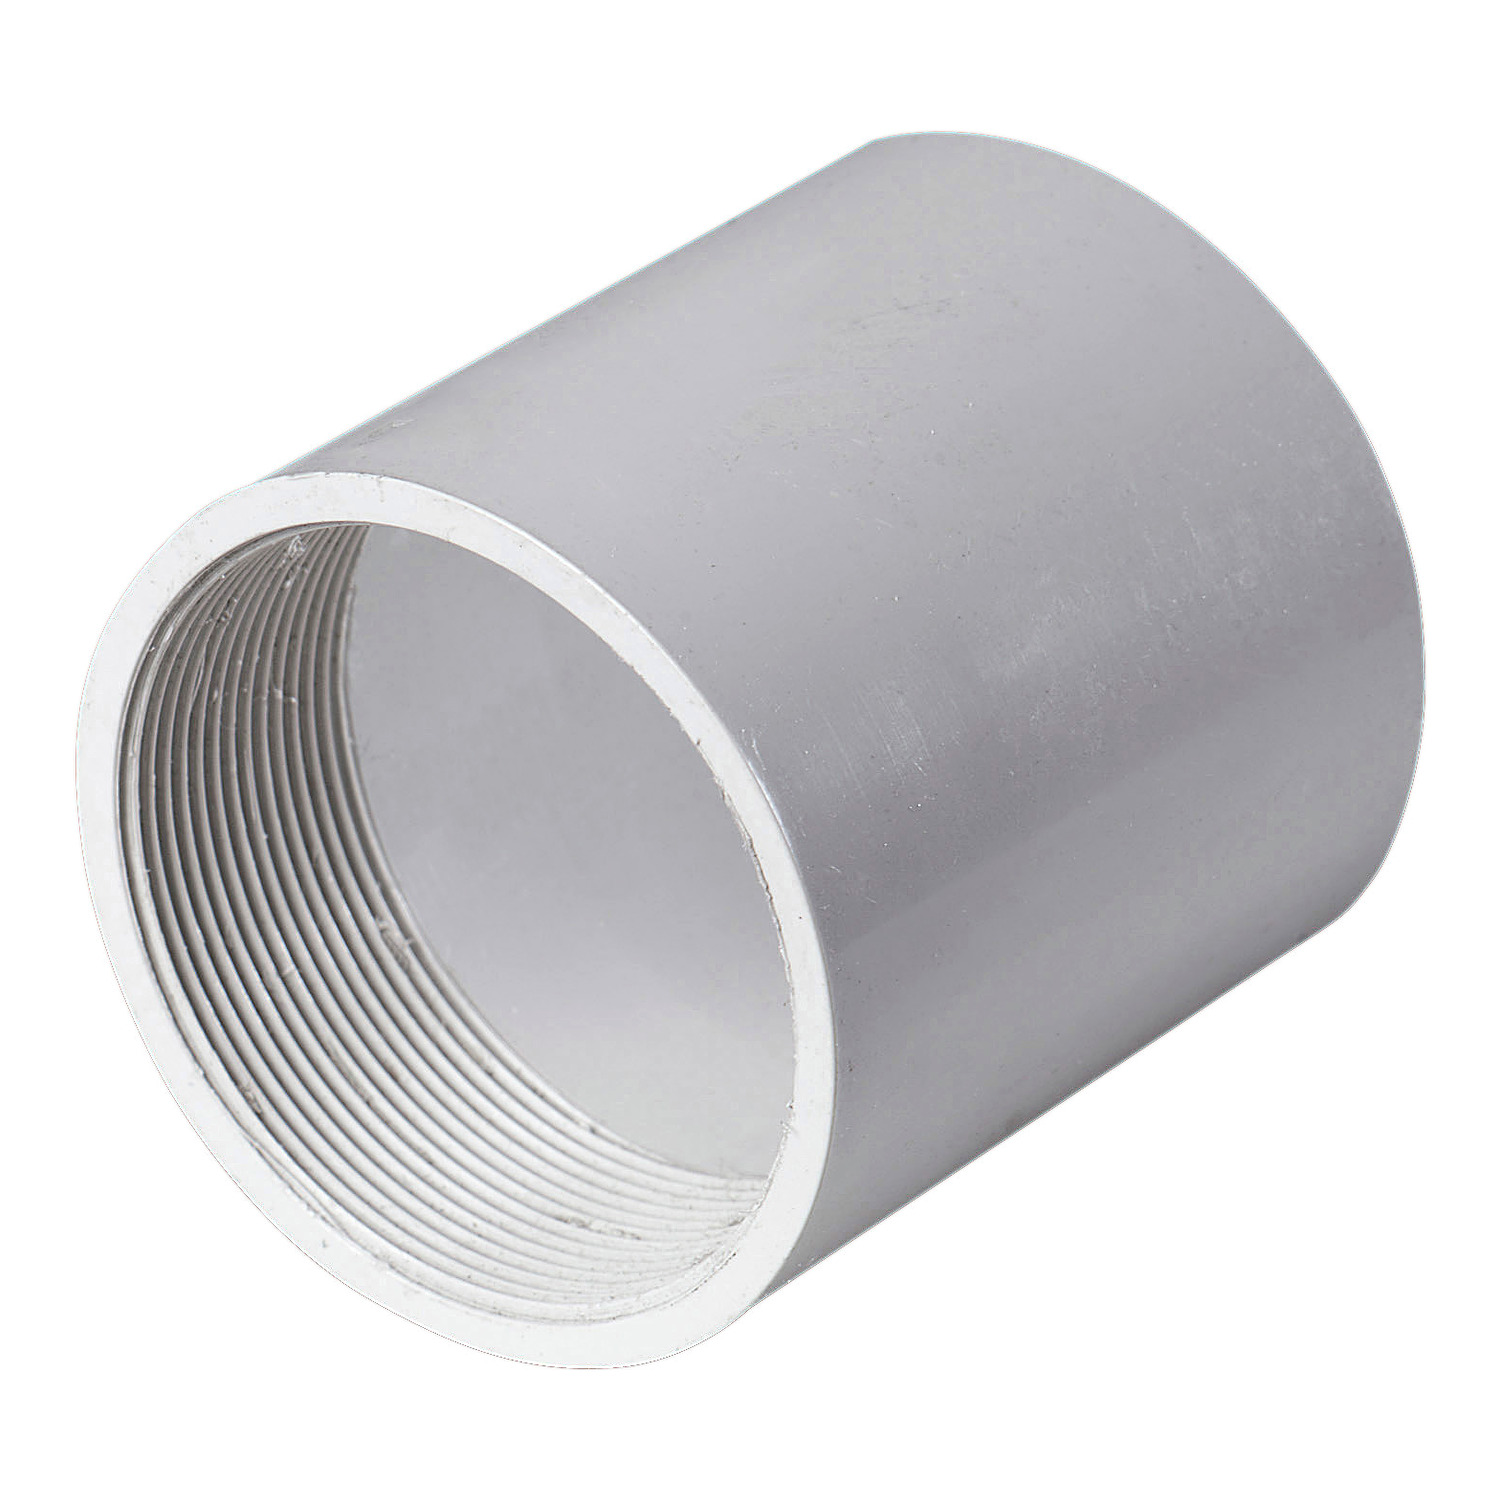 Solid Fittings - PVC, Plain To Screwed Couplings, 50mm, Grey